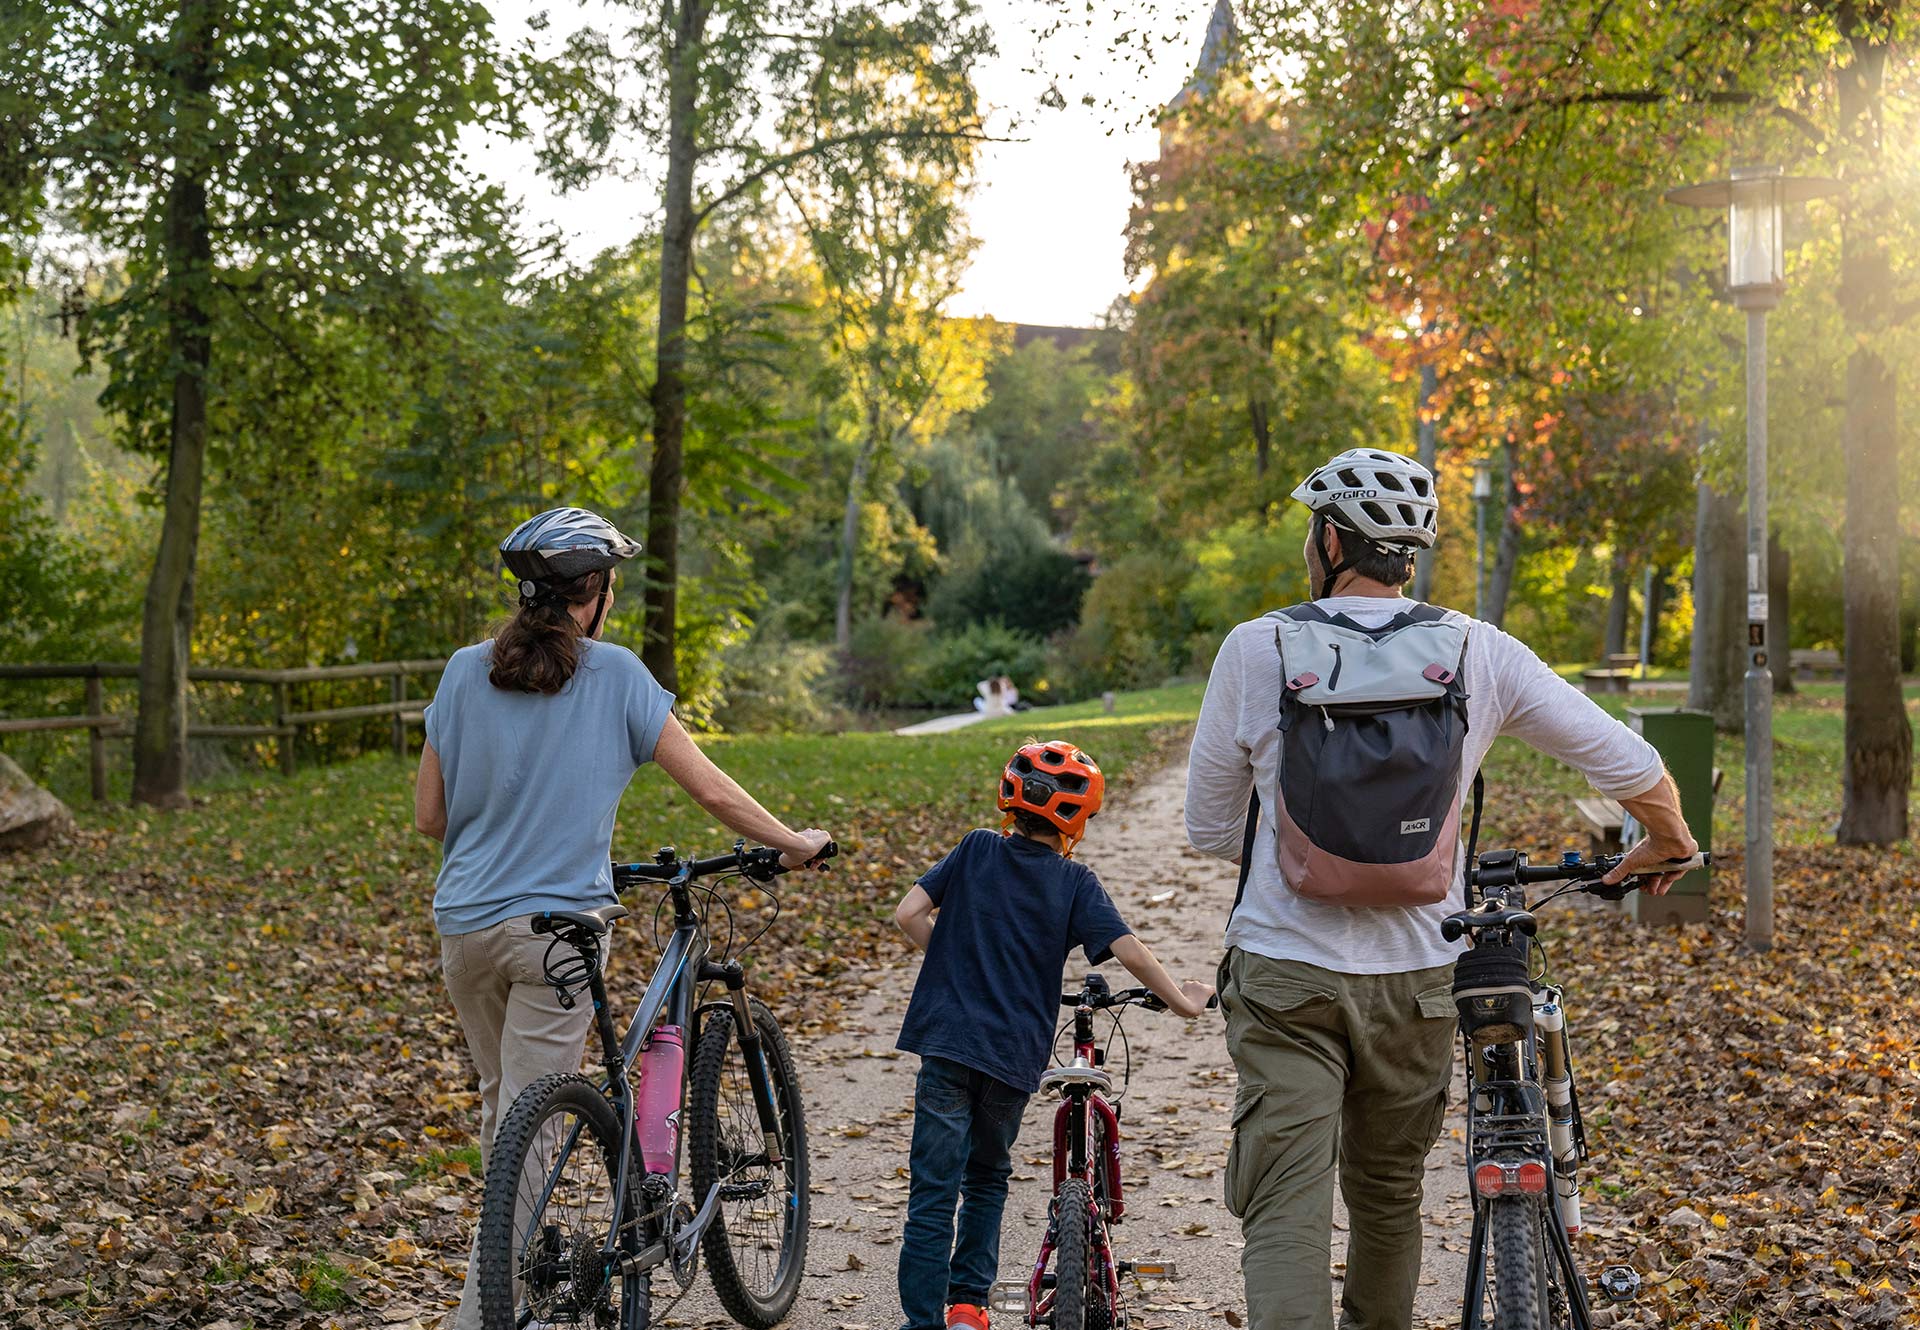 Woman, man and child each push a bicycle and walk along a path through nature.